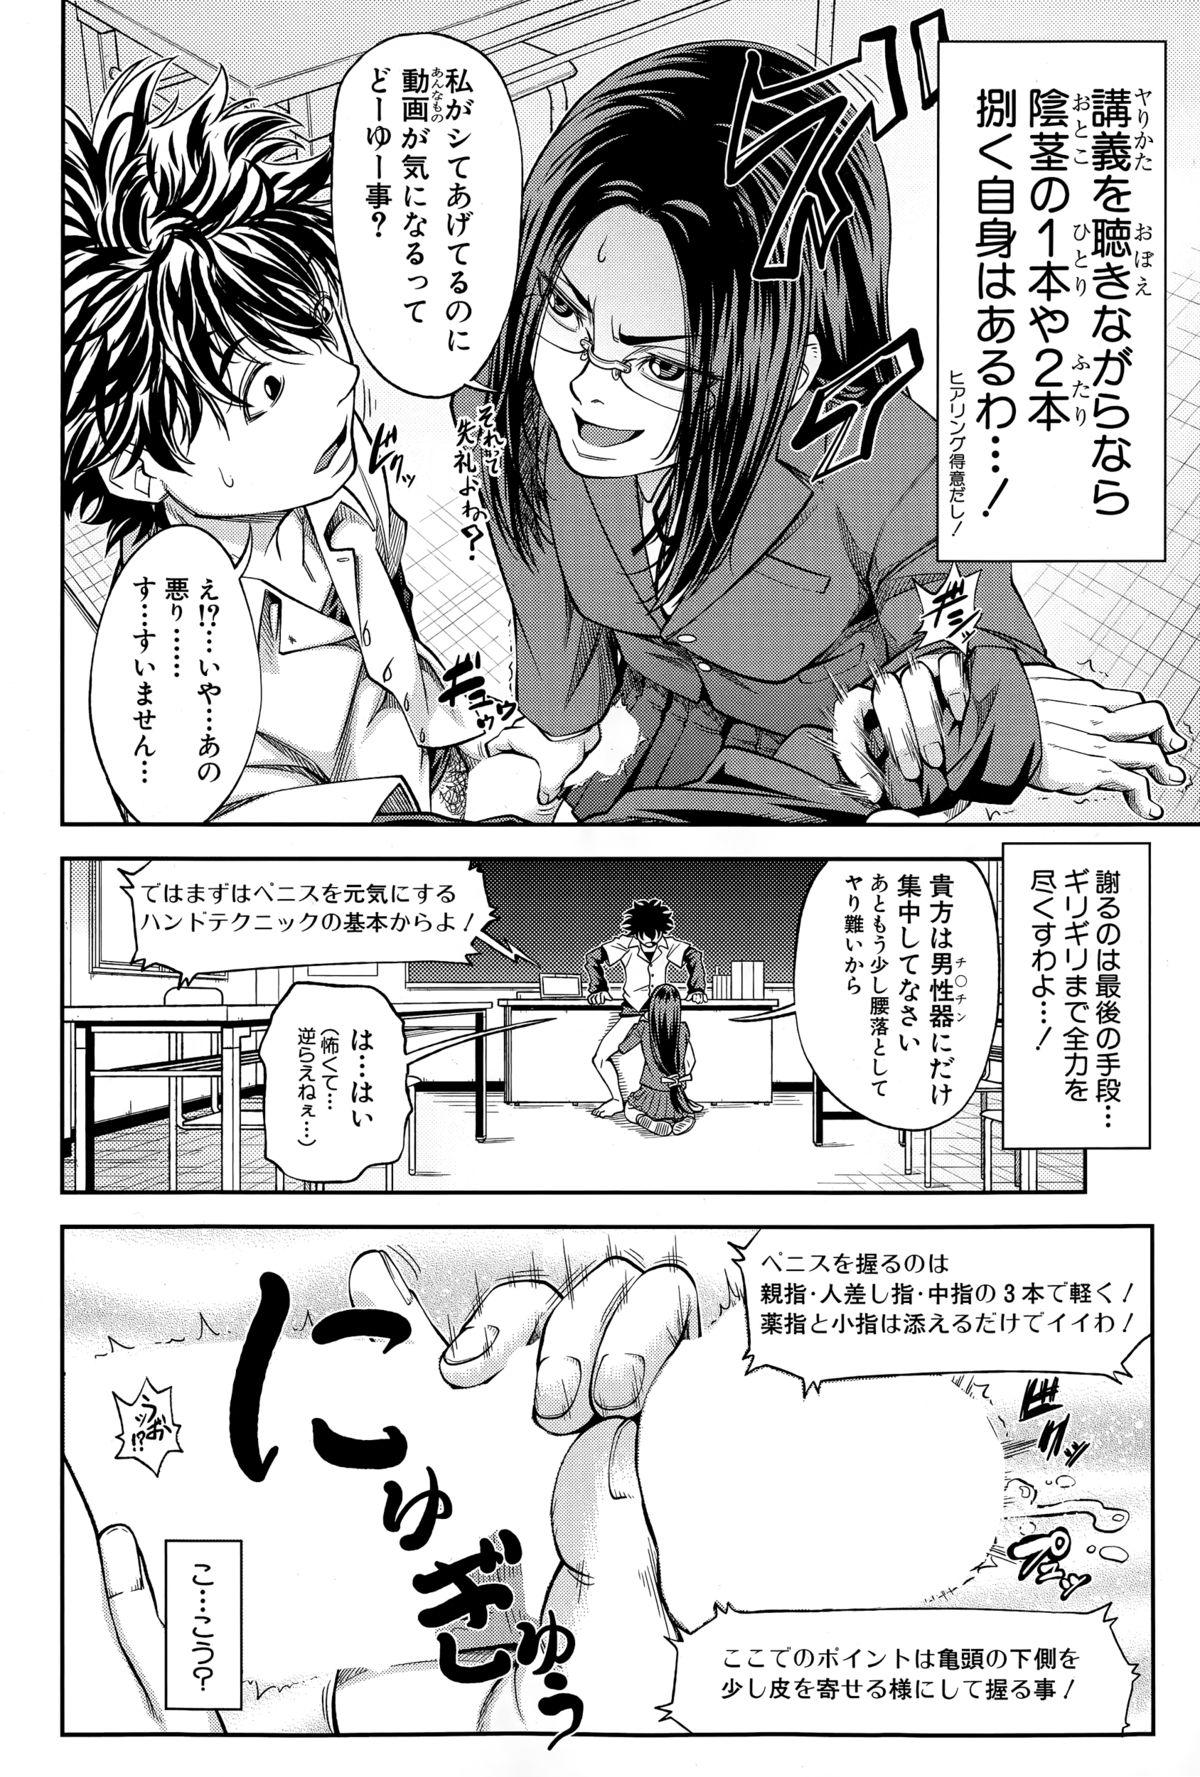 BUSTER COMIC 2015-03 203